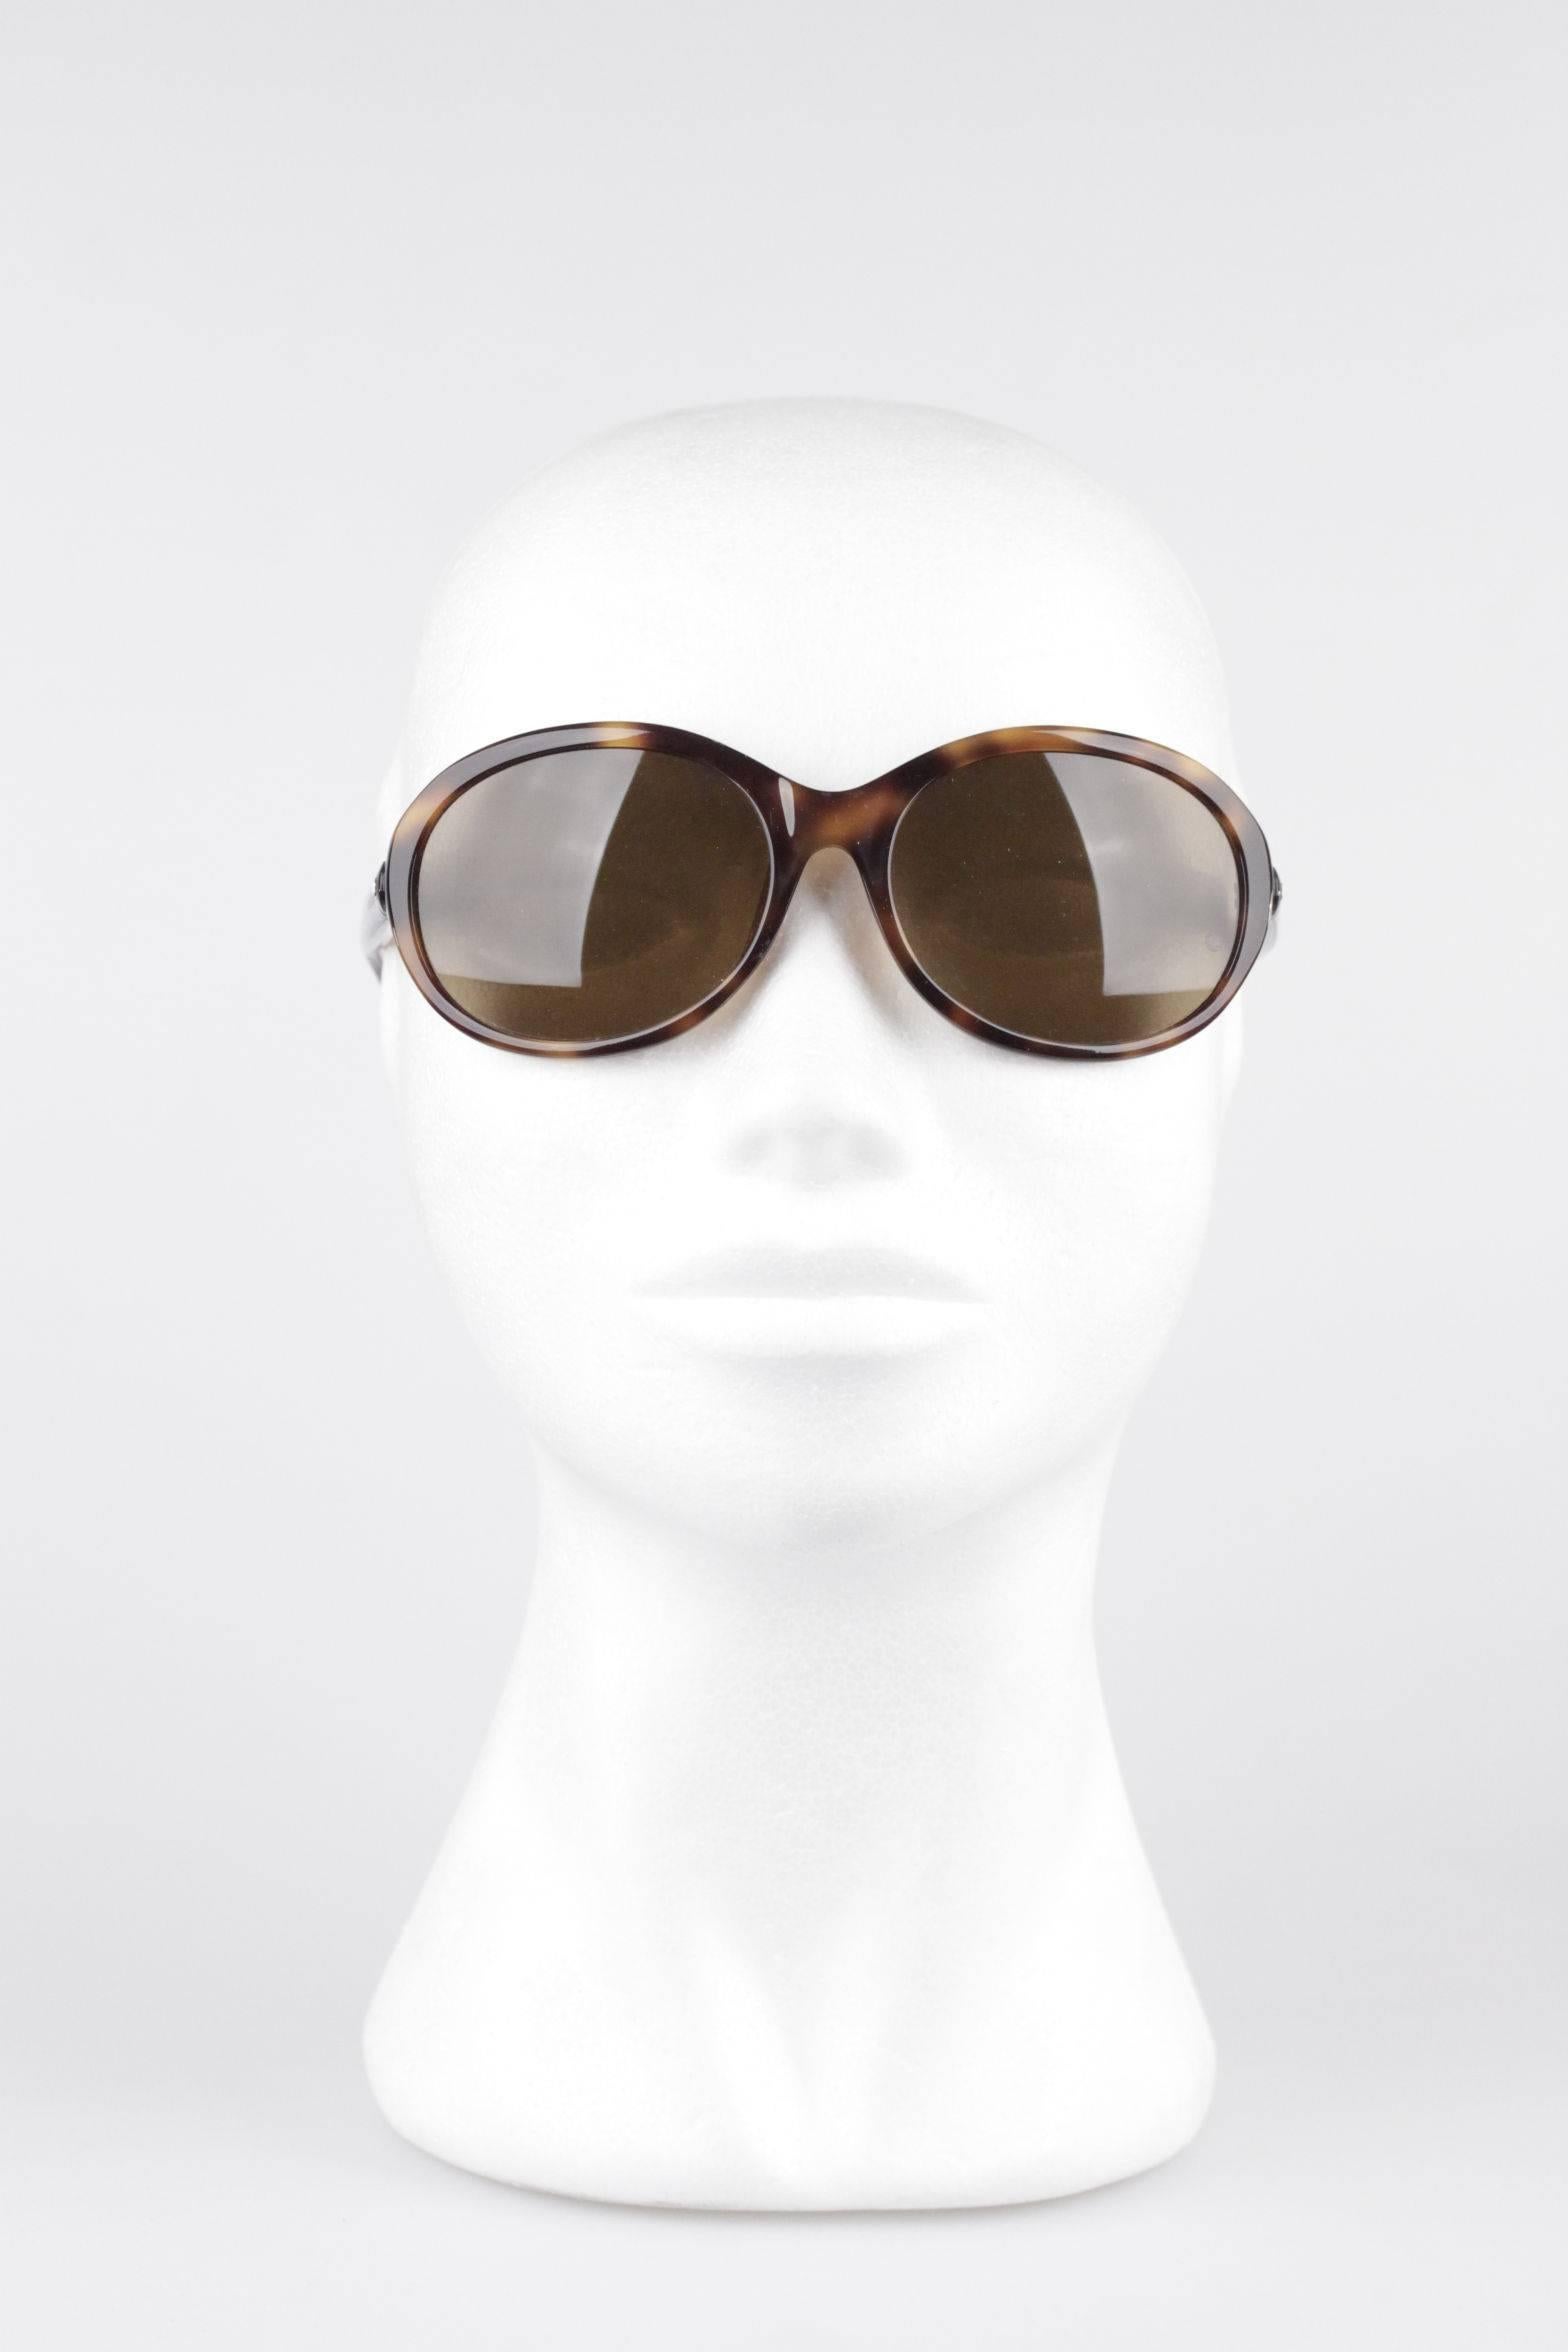 Women's Montblanc Oval Oversized Brown Mint Sunglasses MB138S T32 59mm 125 NOS